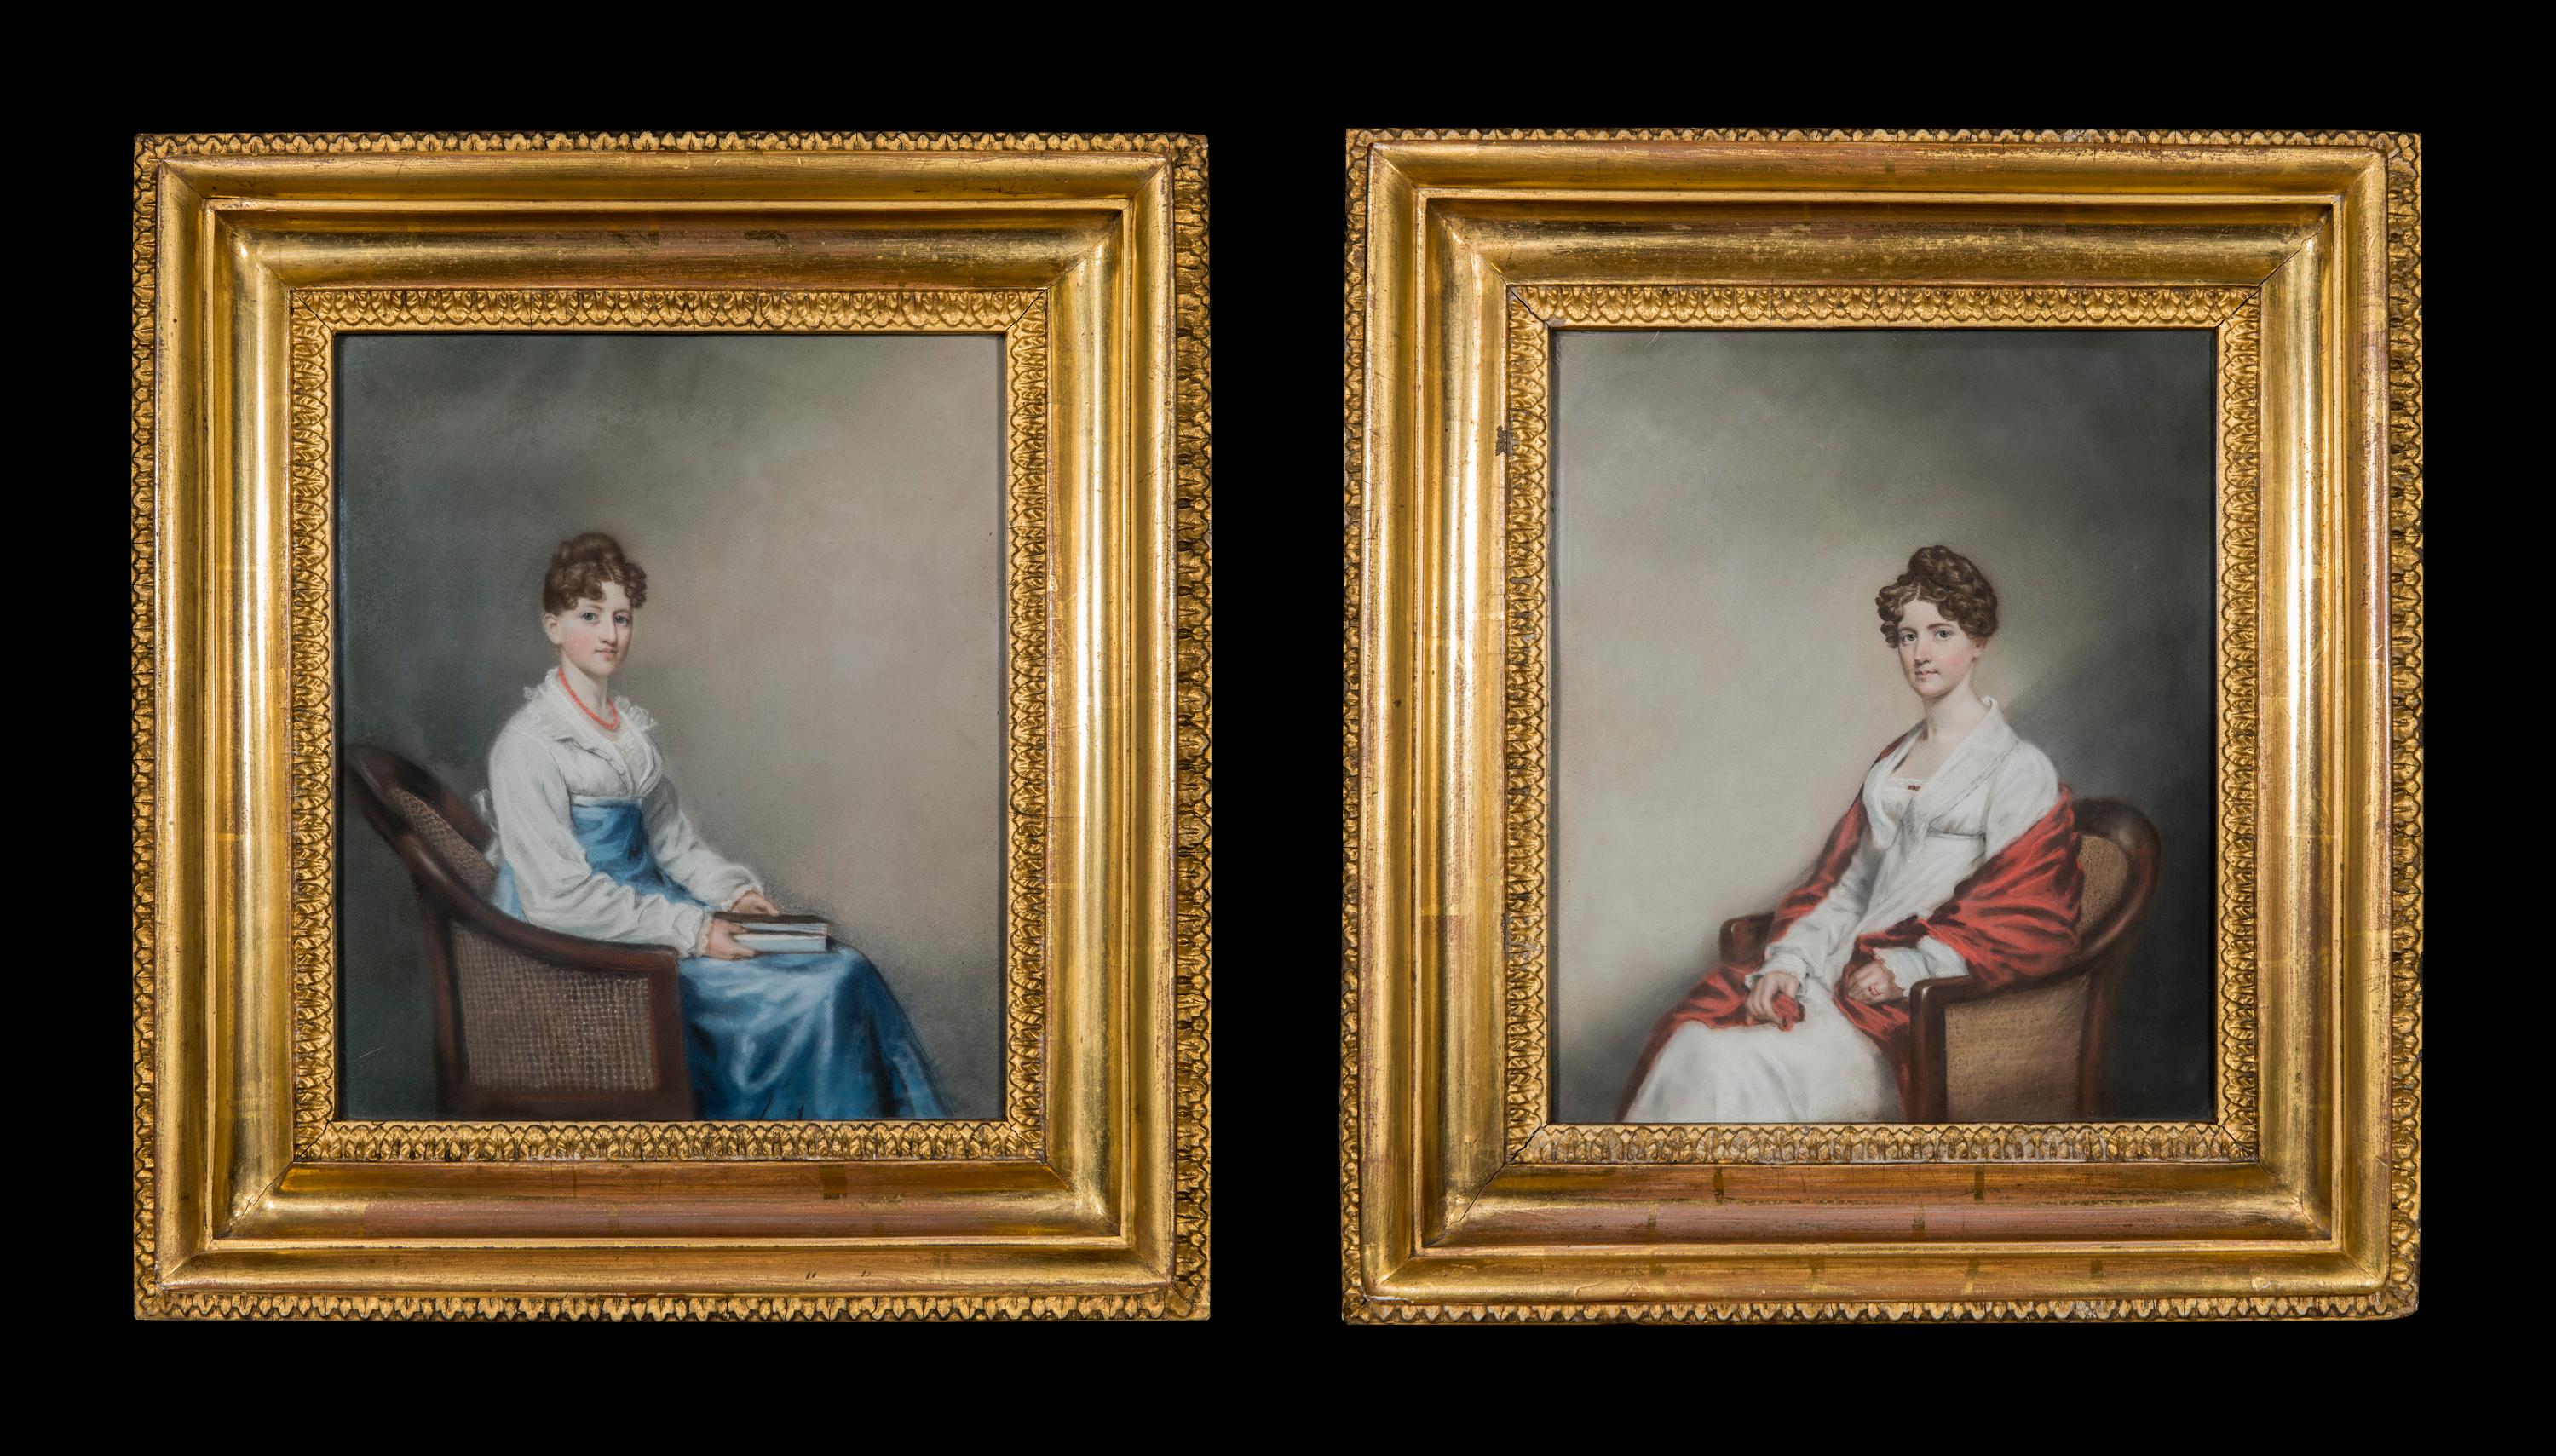 The portraits are by a unknown artist and the sitters are presumably sisters or certainly related to each other and sit in Regency mahogany bergere chairs. The portraits are framed in the original giltwood frames.